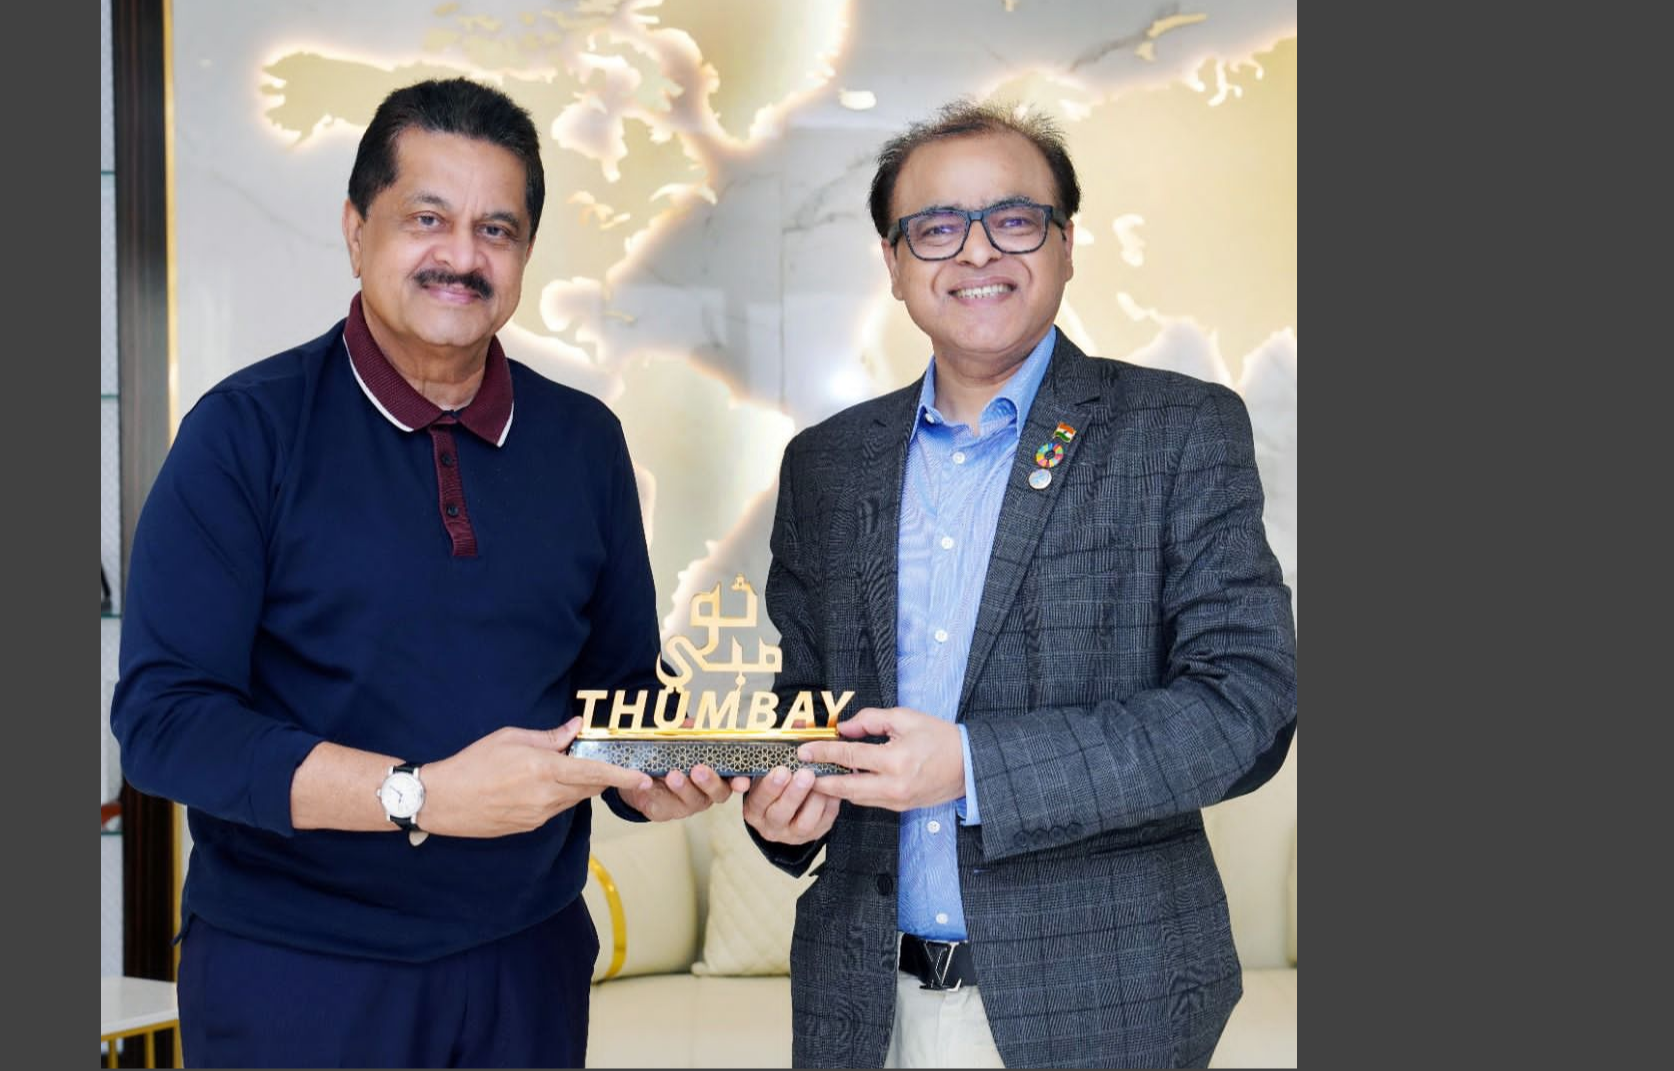 Interaction with Dr. Thumbay Moideen